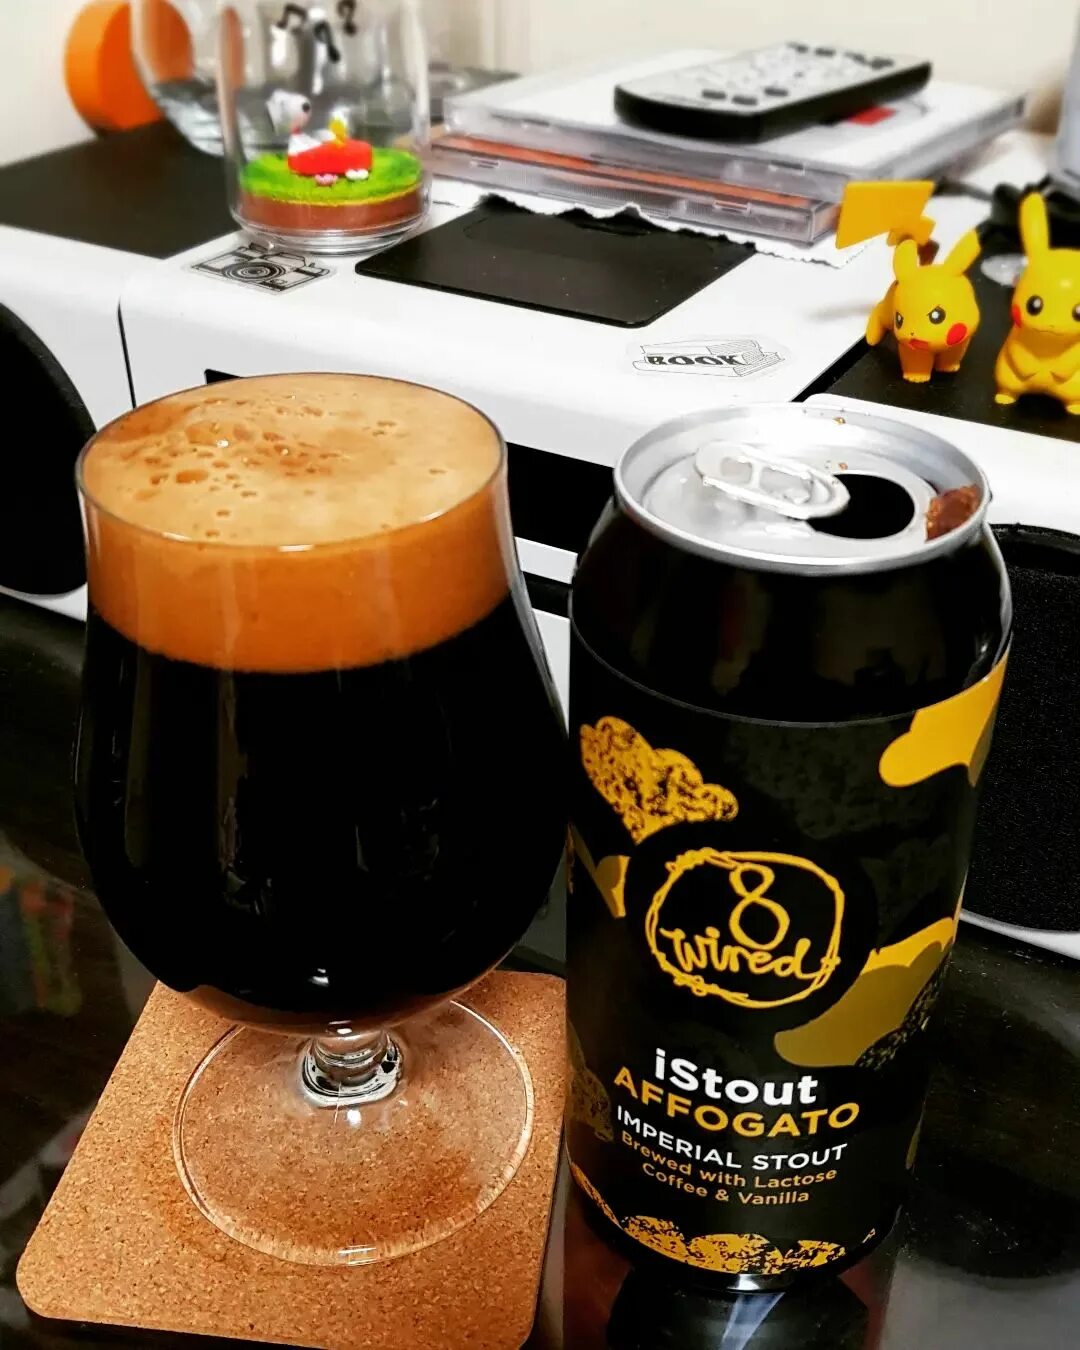 Steam brew imperial stout фото 94